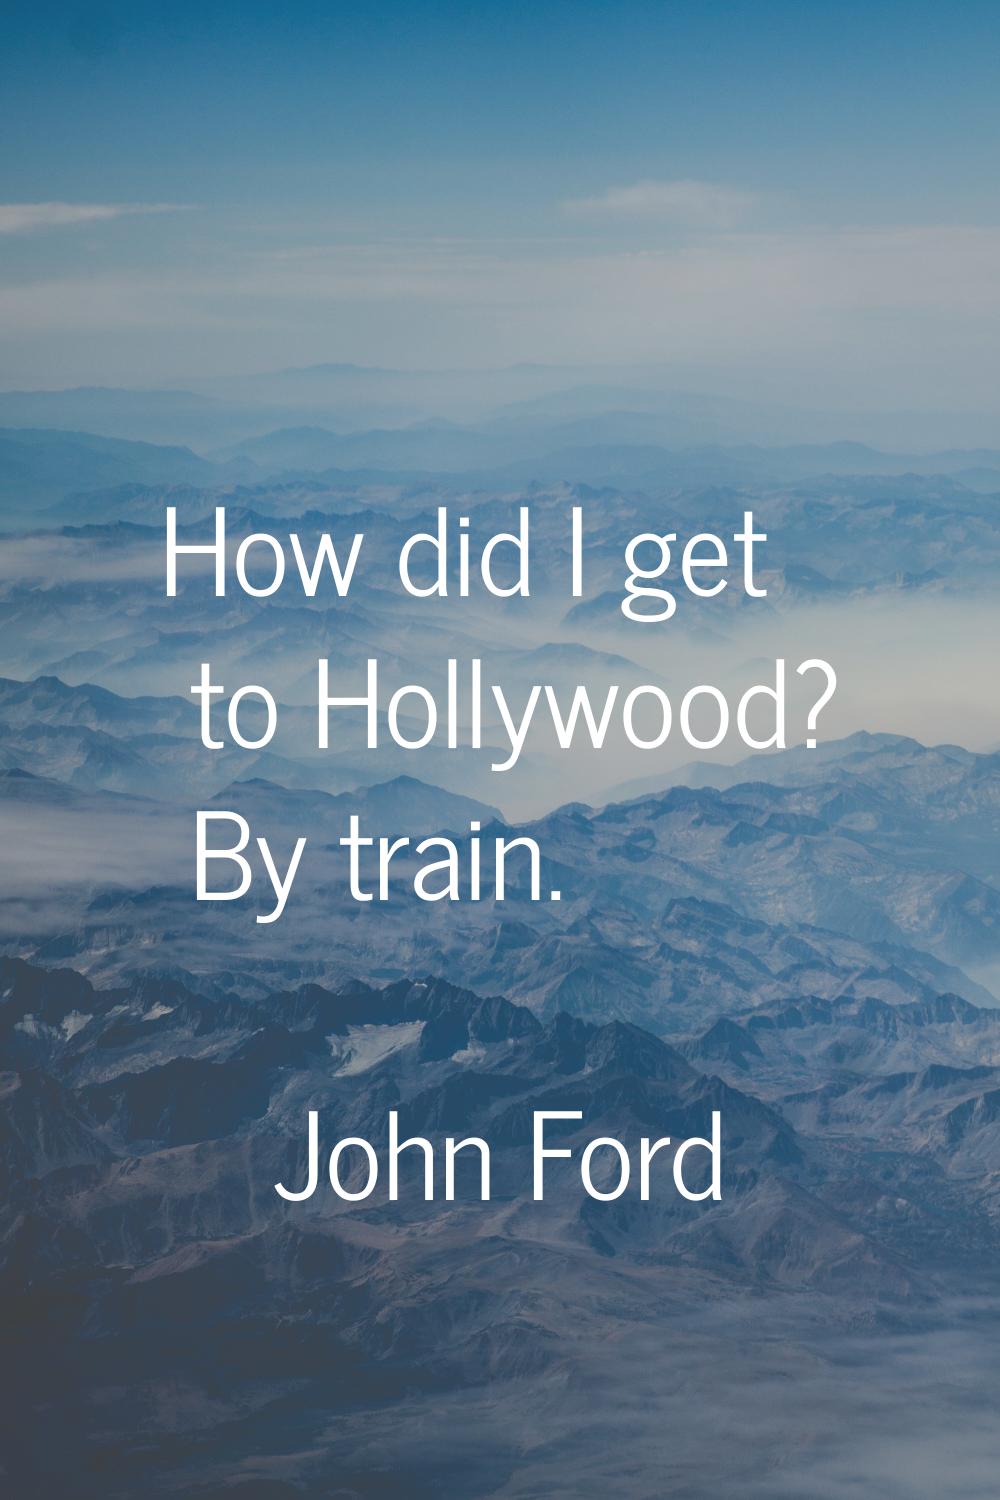 How did I get to Hollywood? By train.